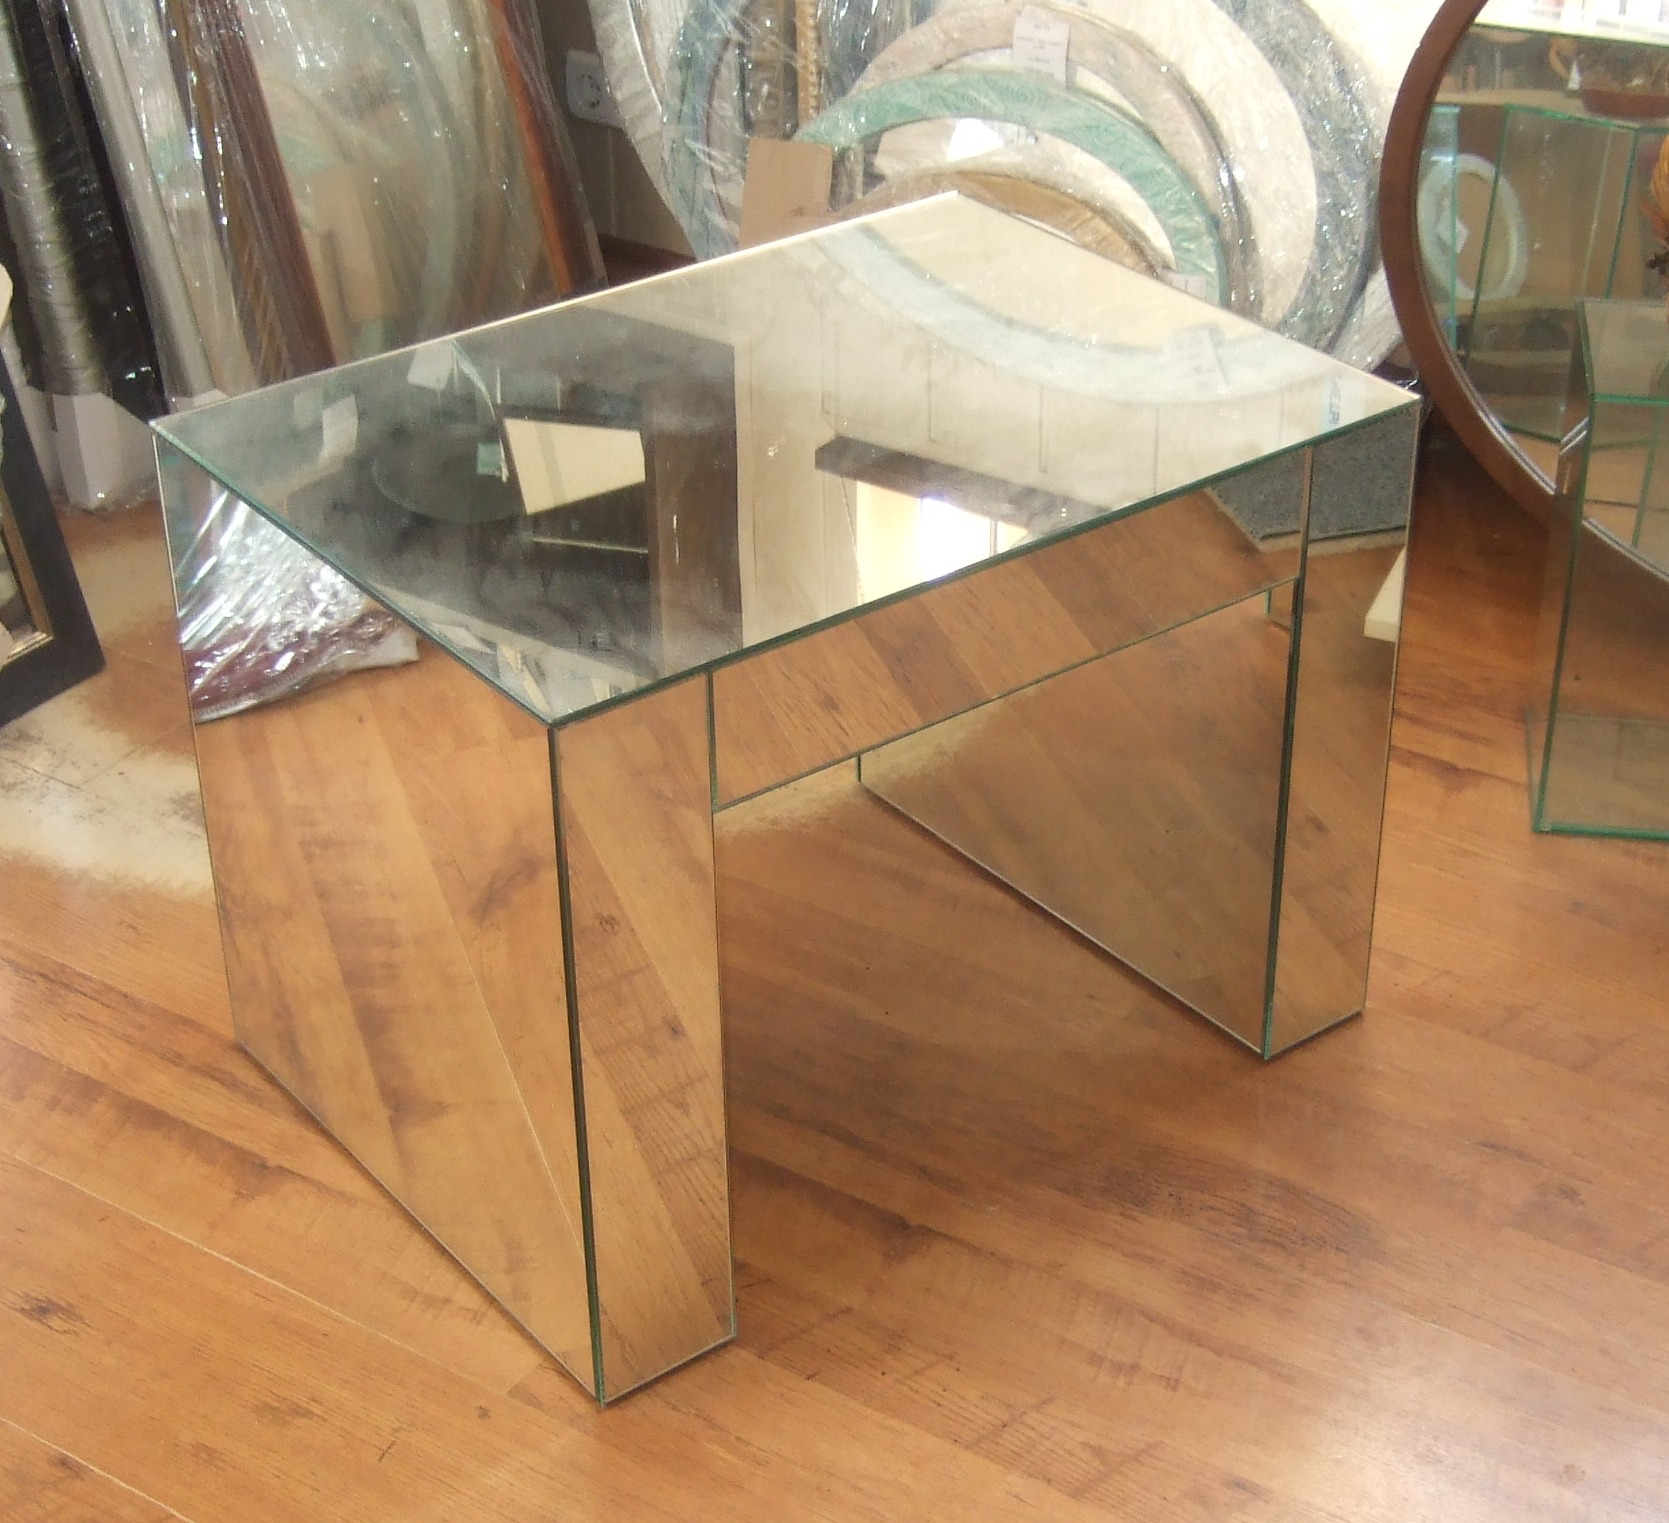 Glass and mirror furniture